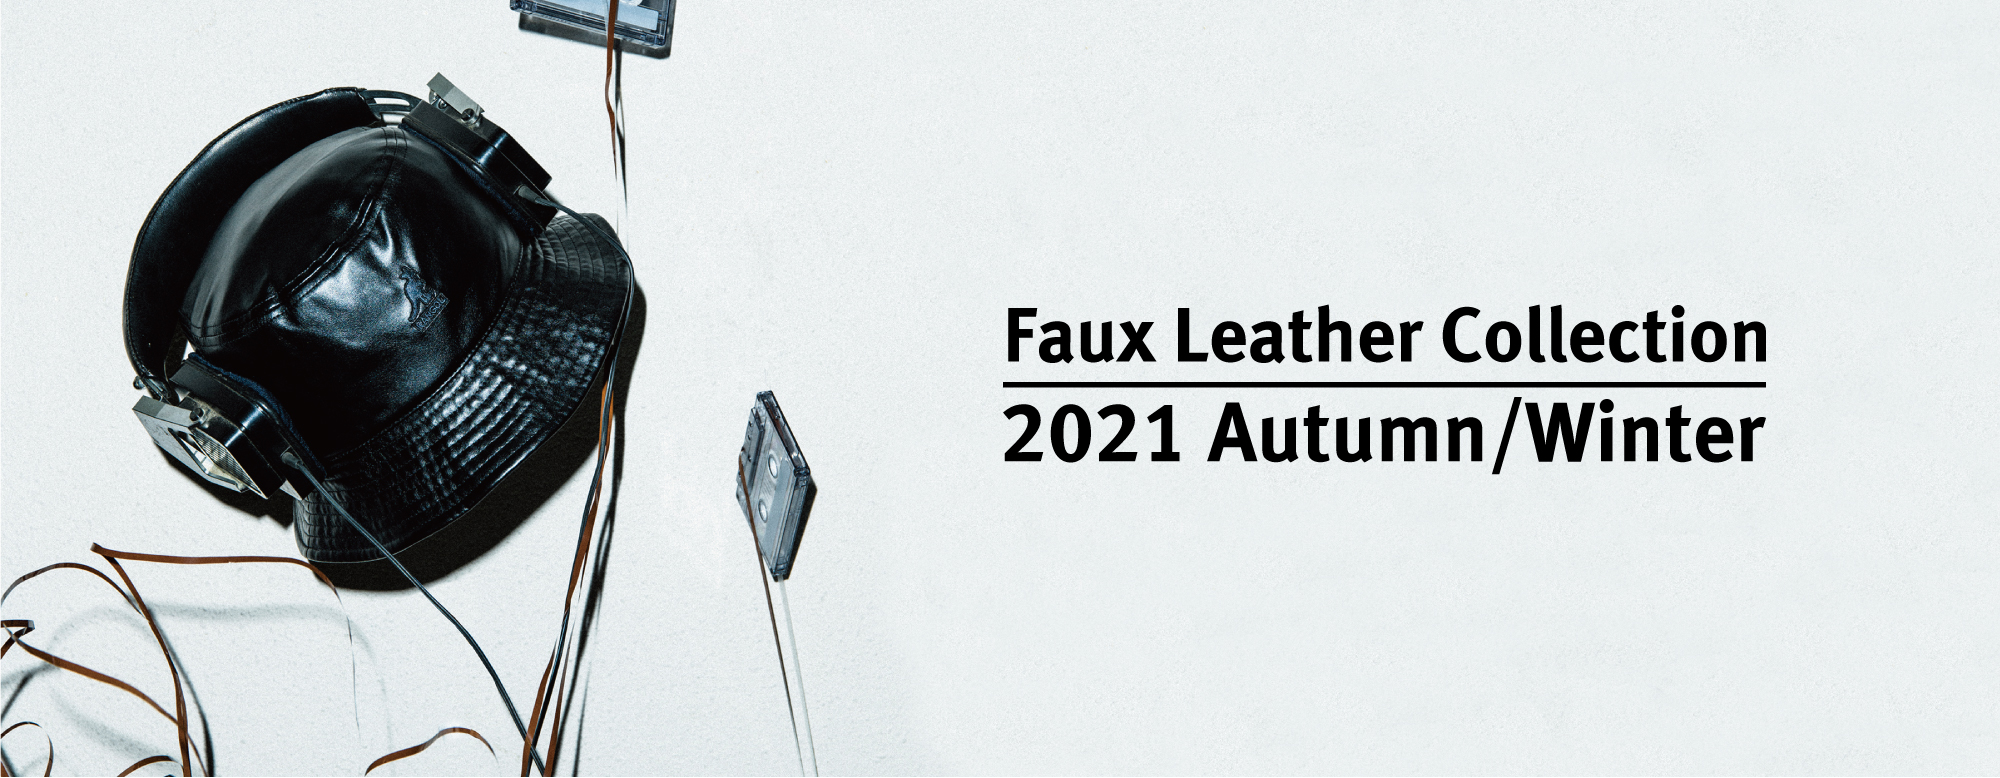 【2021AW Faux Leather Collection】